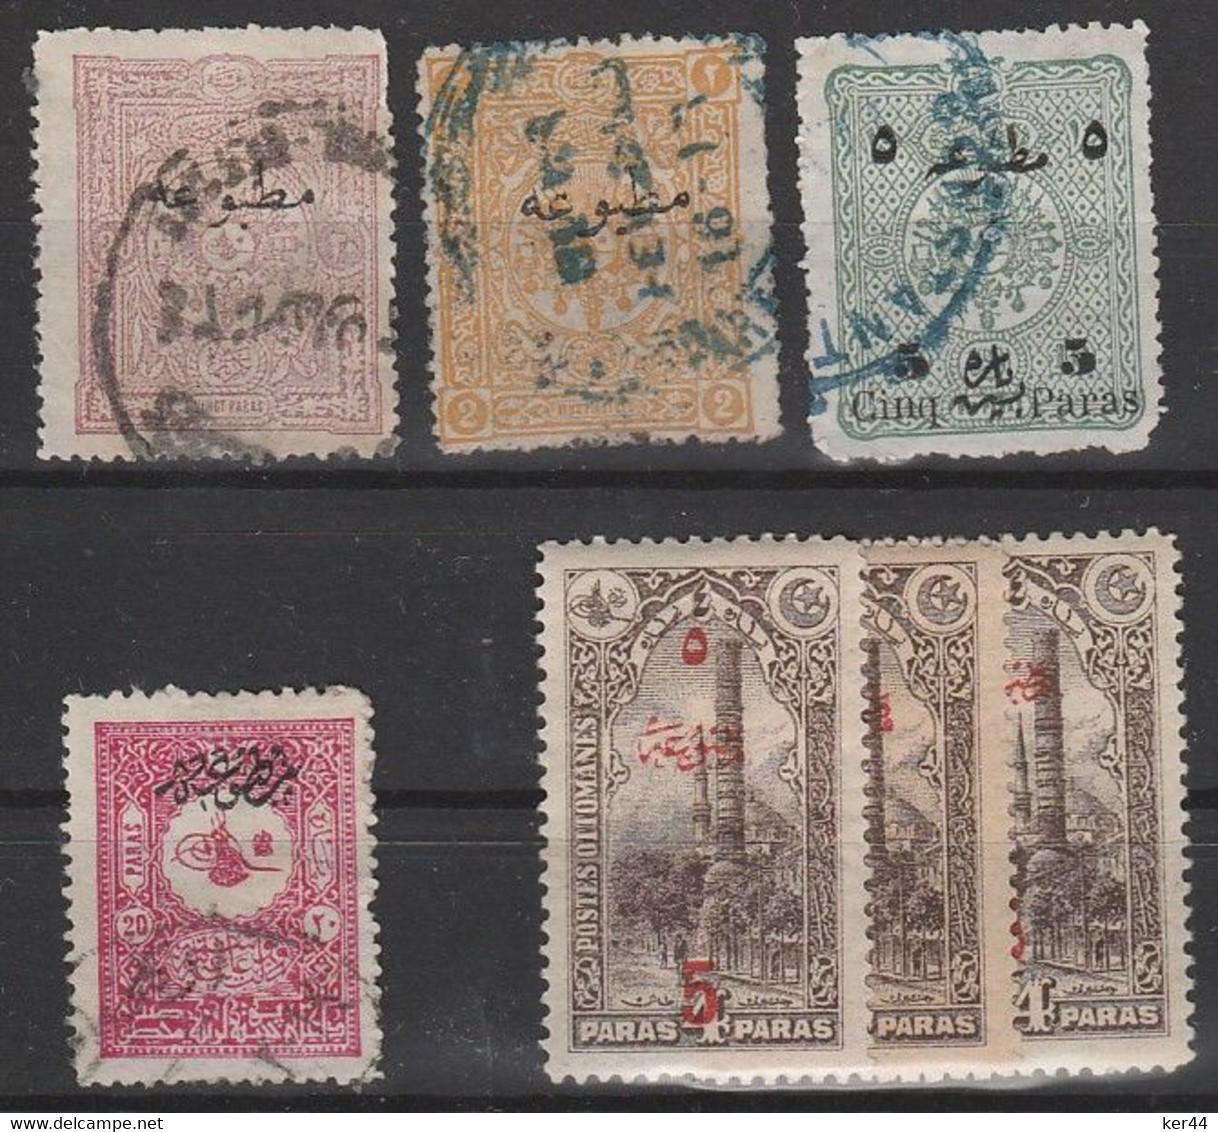 Journaux_Lot De 7 Timbres **/*/O -  Newspaper Stamps Lot_MNH/MH/USED - Dagbladzegels